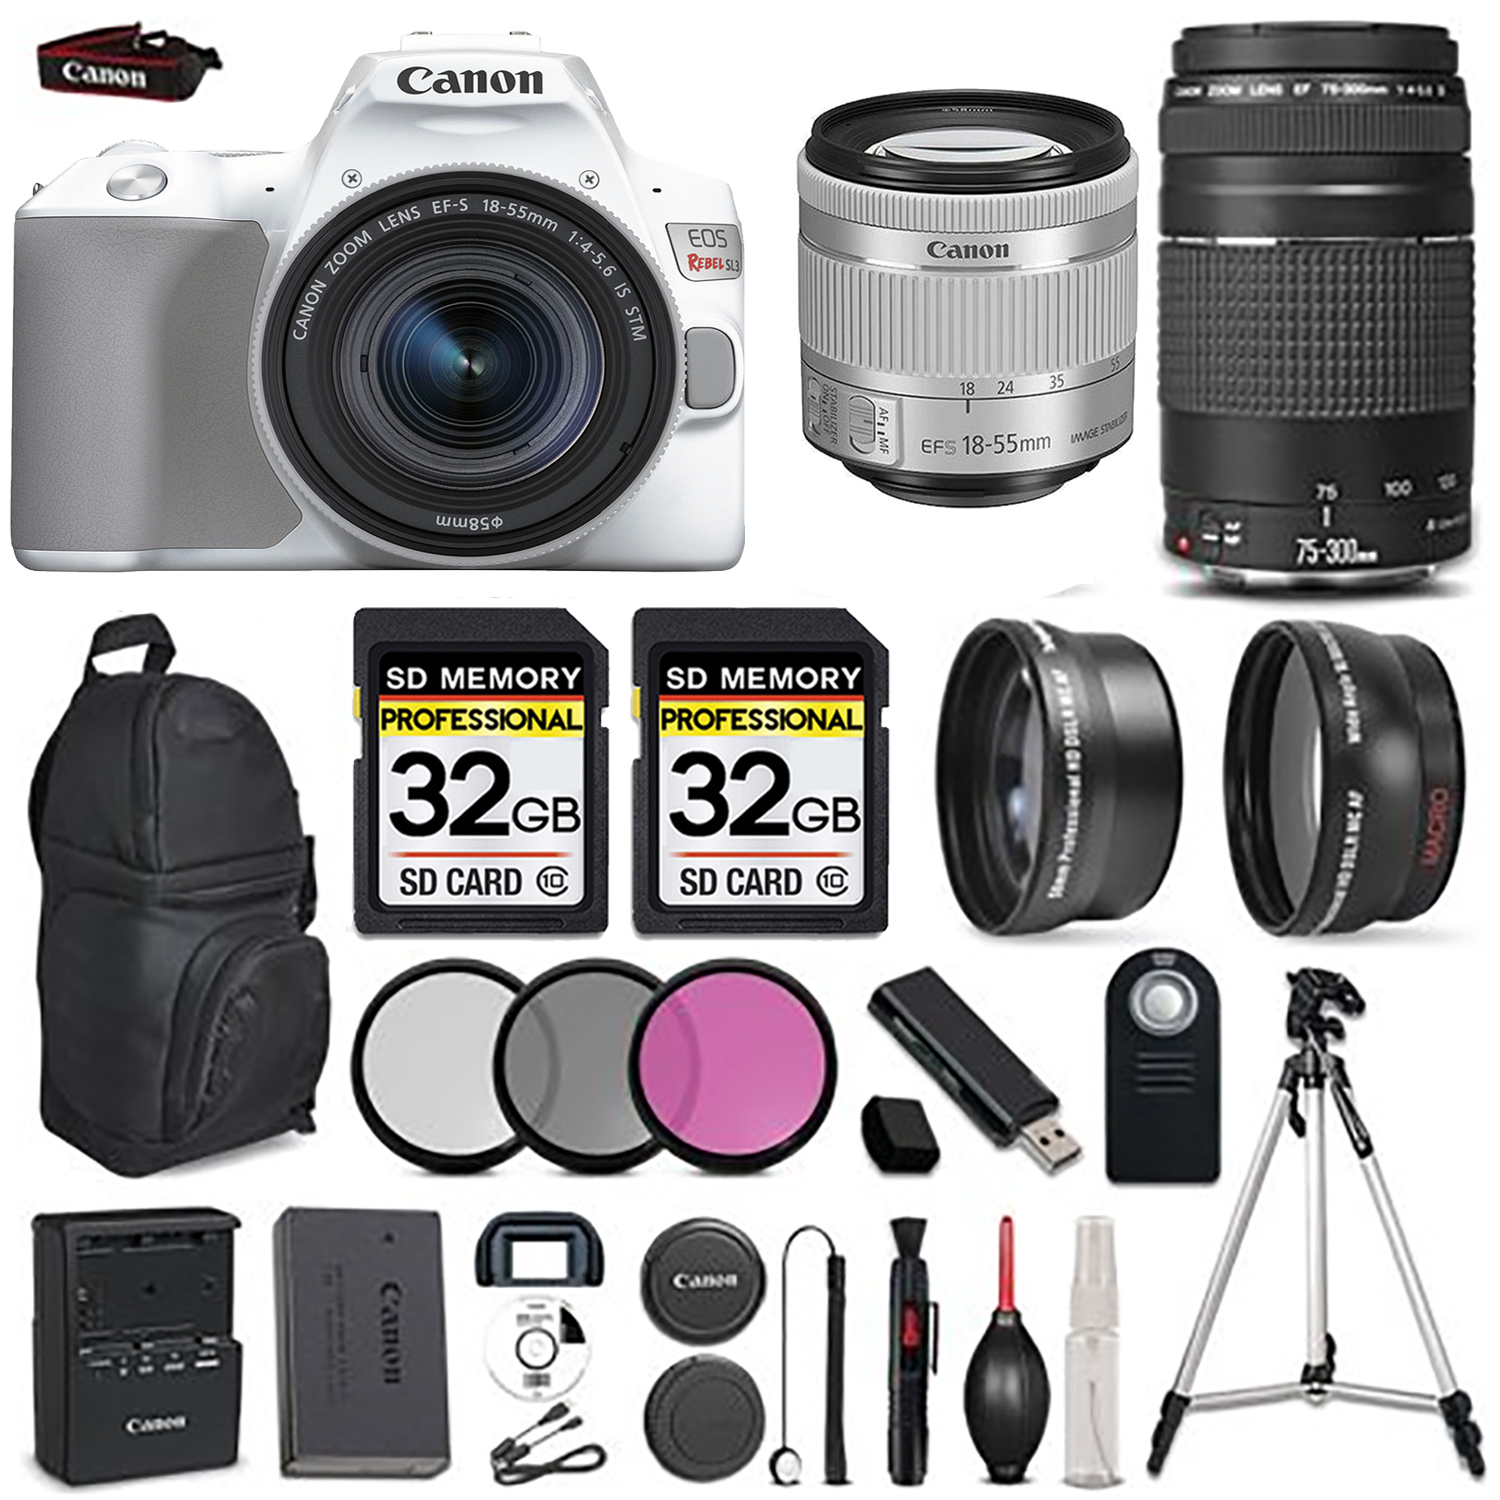 EOS Rebel SL3 Digital Camera (White) with 18-55mm IS STM + 75- 300mm III  - LOADED KIT *FREE SHIPPING*